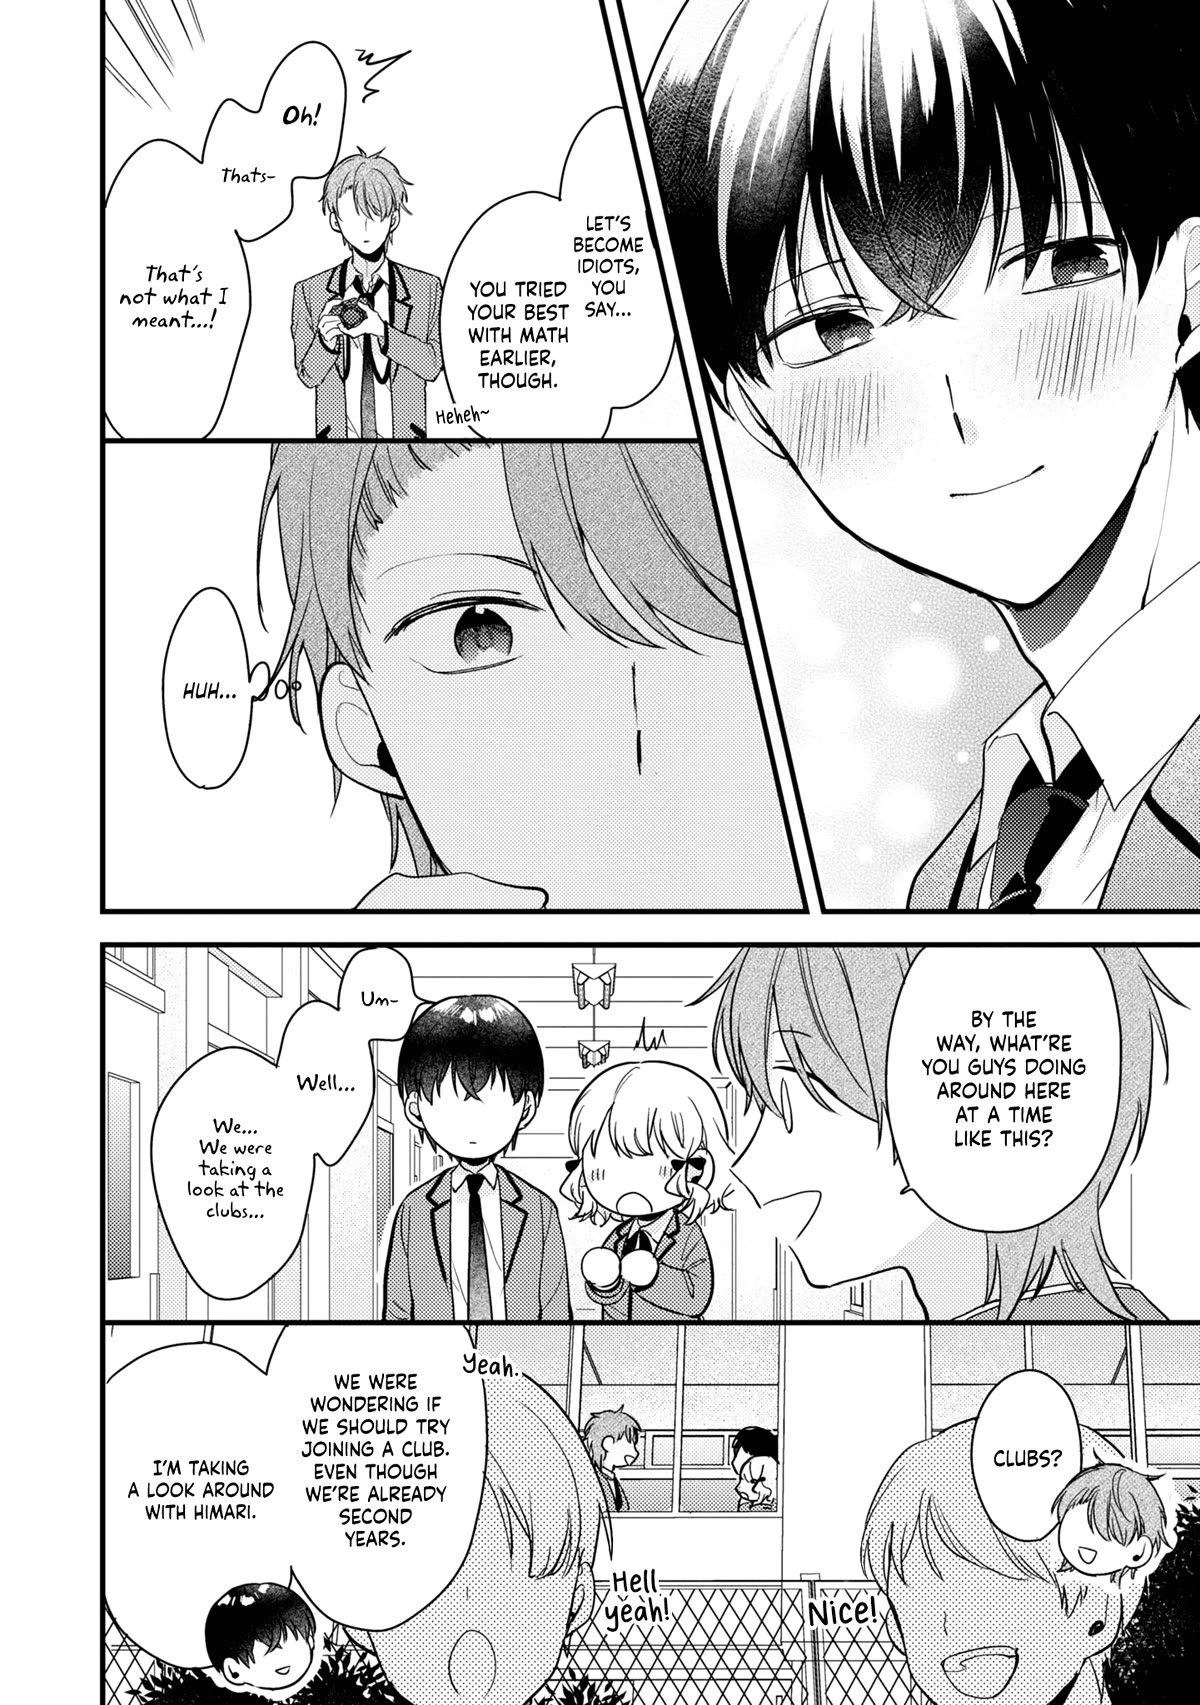 I Have A Second Chance At Life, So I’Ll Pamper My Yandere Boyfriend For A Happy Ending!! Chapter 4 #19